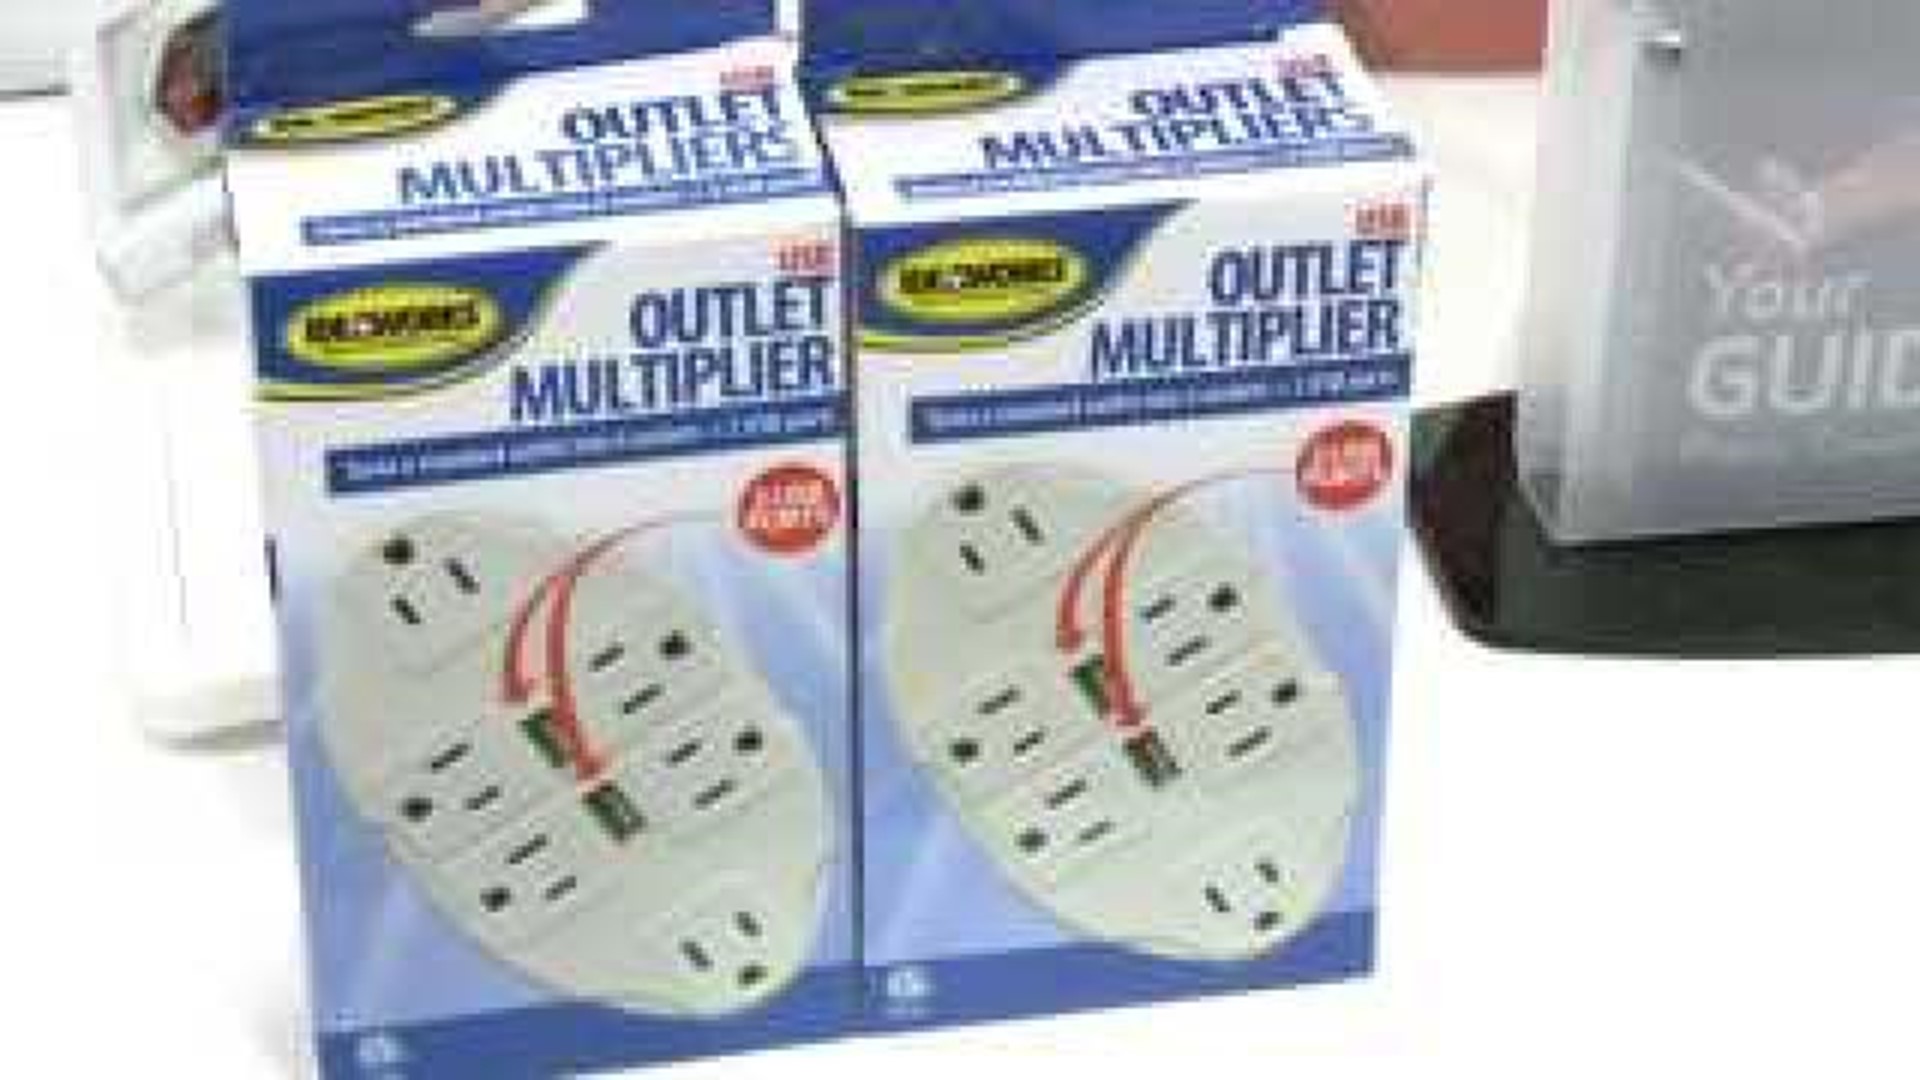 Does It Really Work? Outlet Multiplier